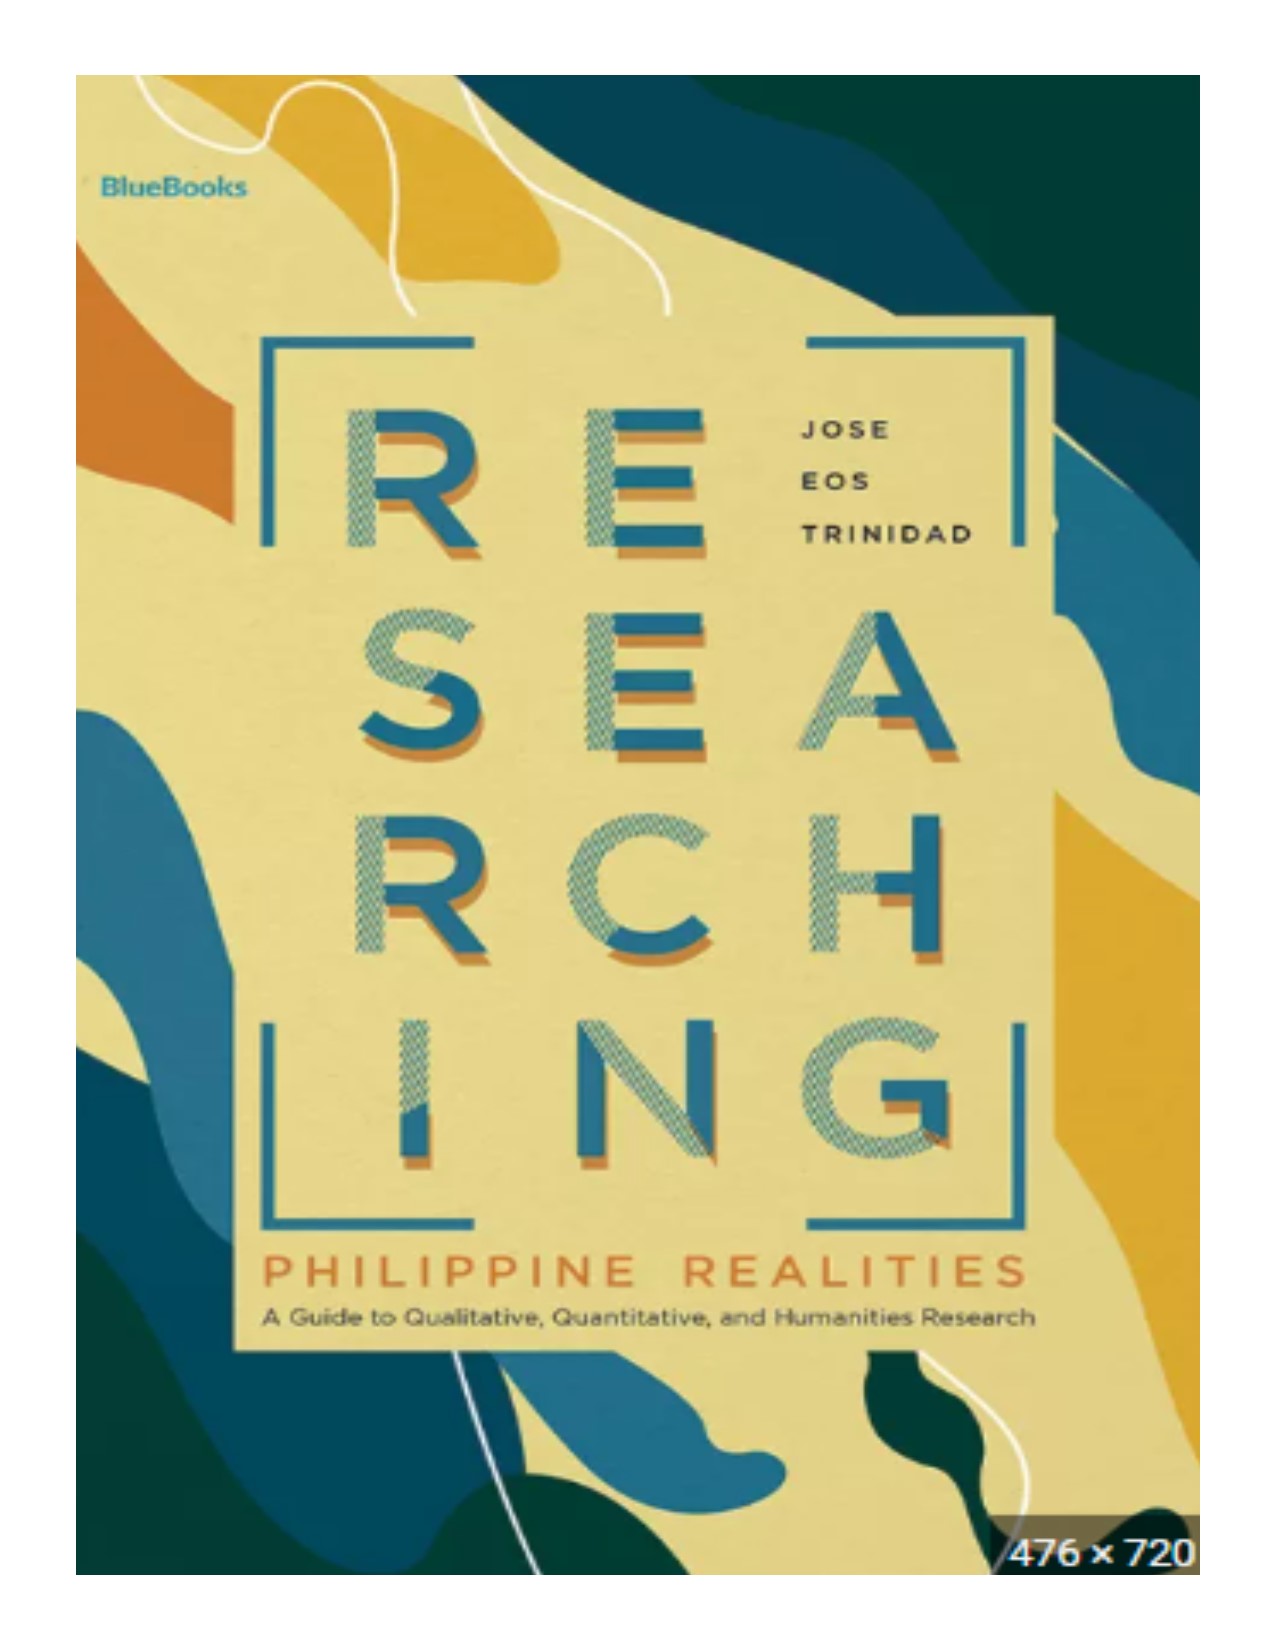 Researching Philippine realities a guide to qualitative, quantitative, and humanities research